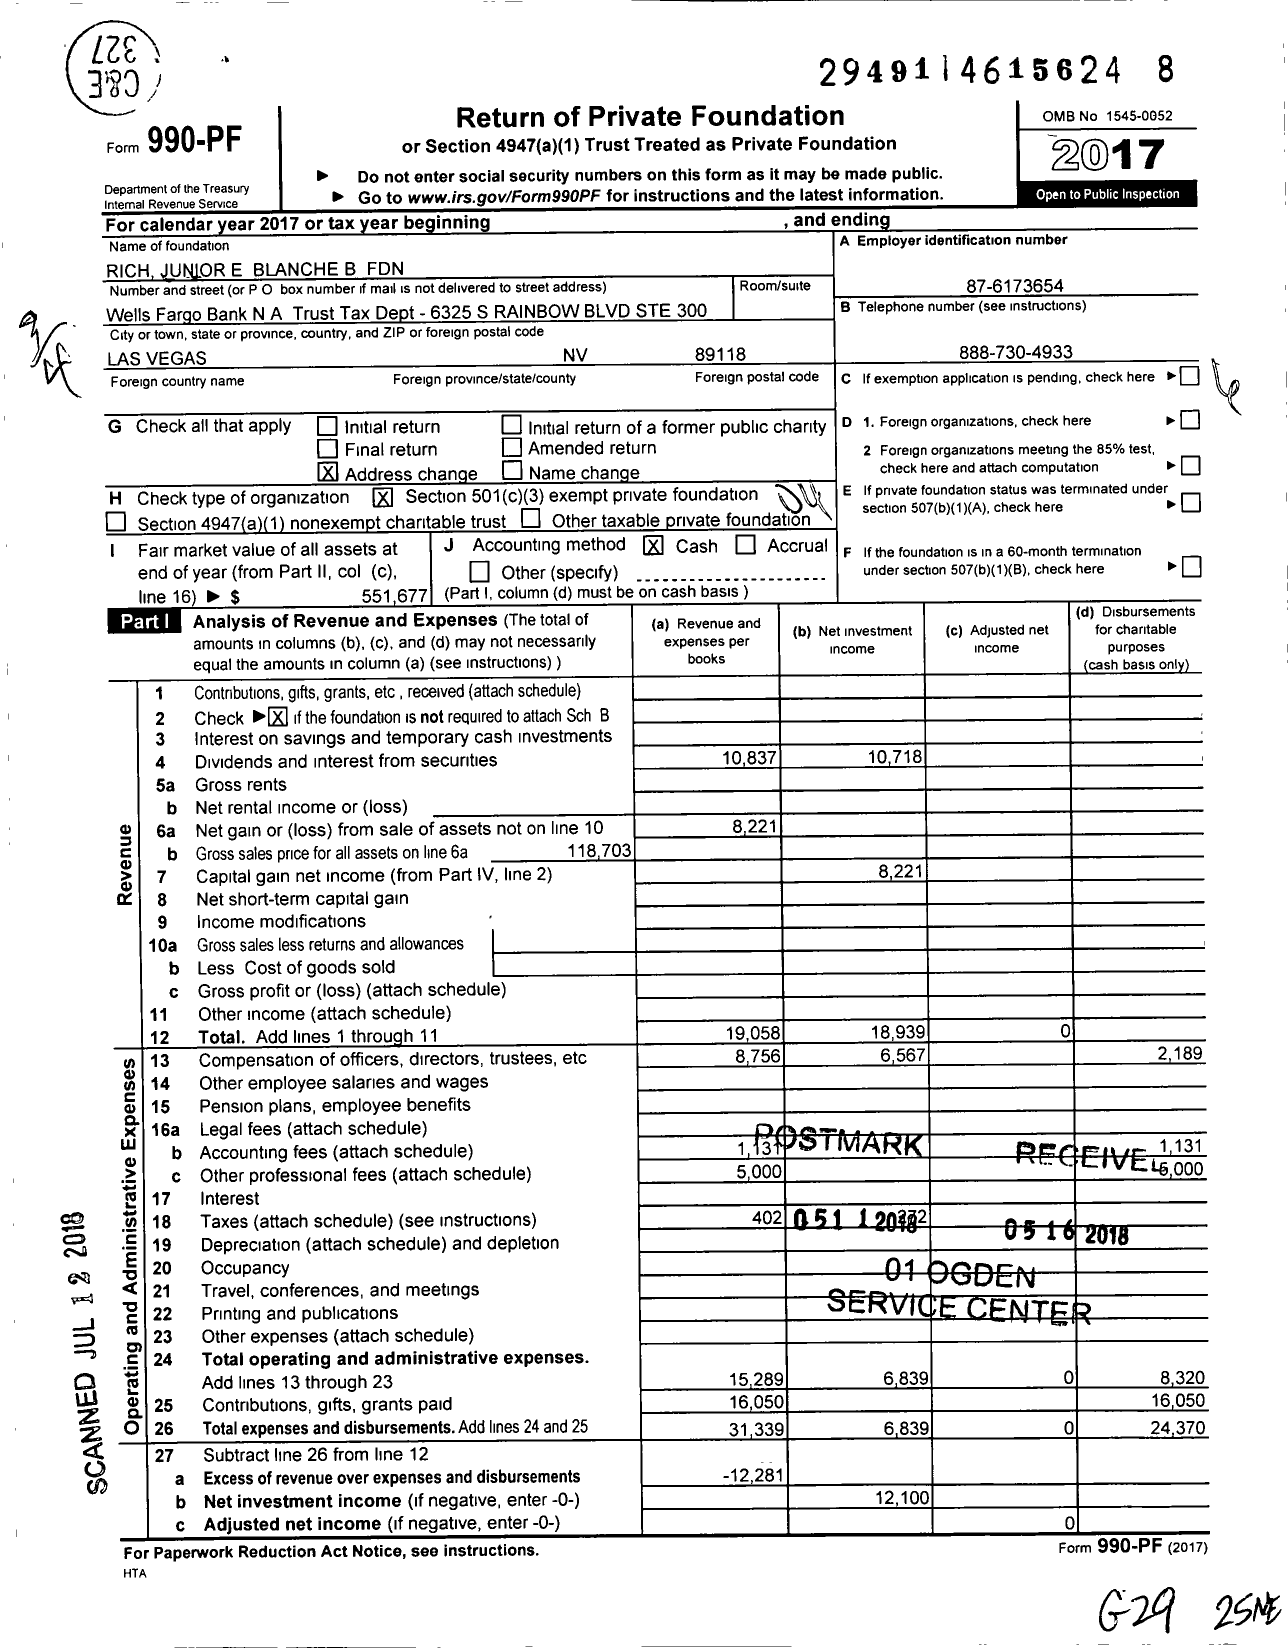 Image of first page of 2017 Form 990PF for Rich Junior E and Blanche B Foundation